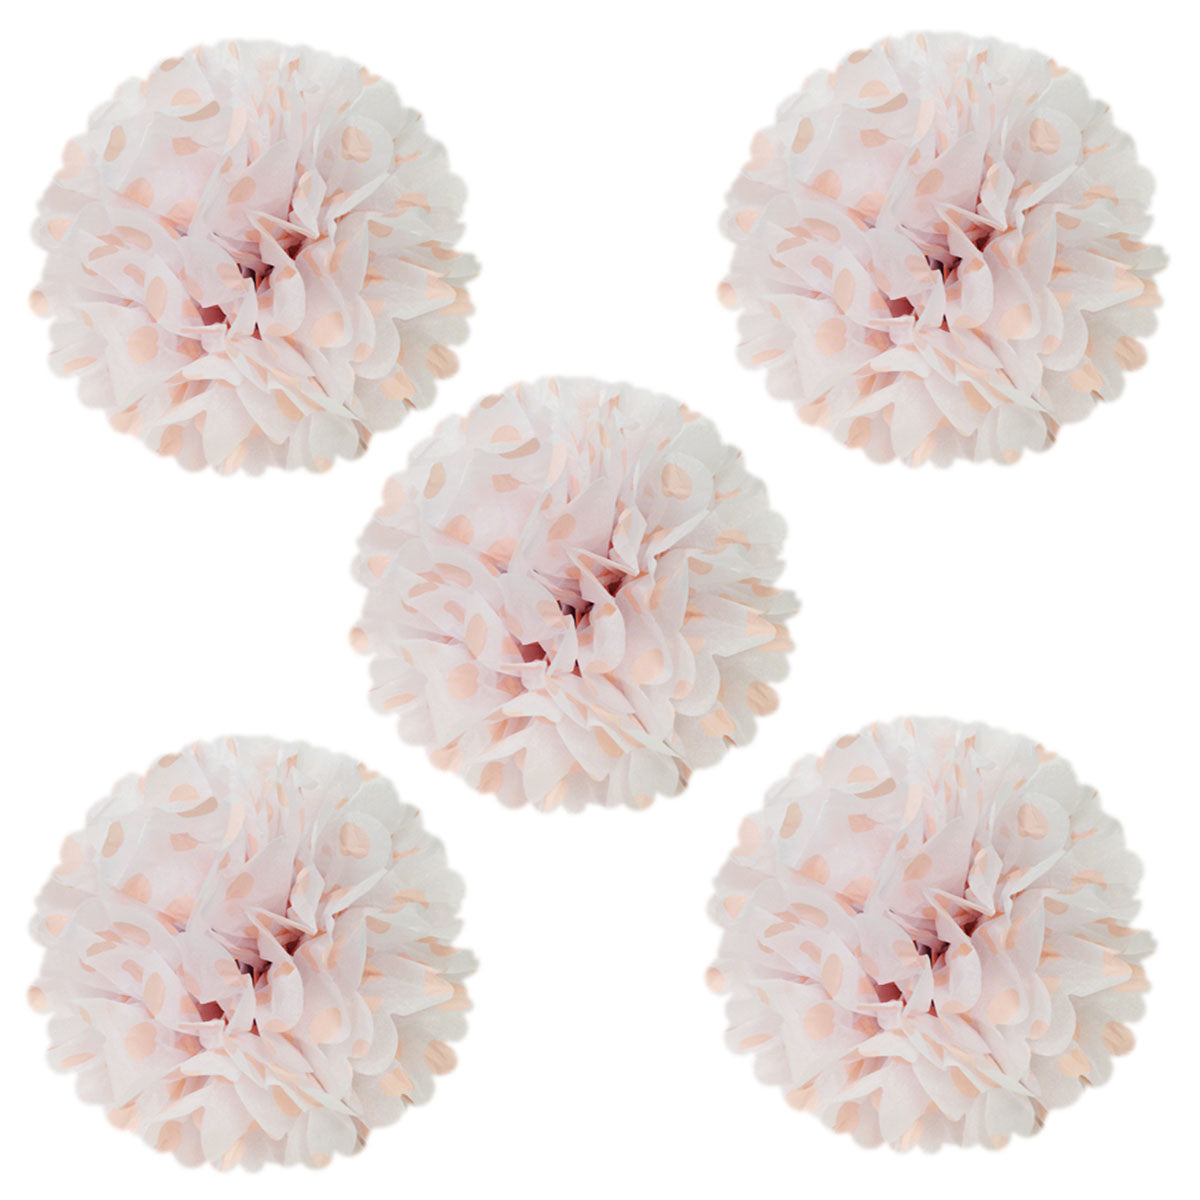 Wrapables 8 inch Set of 5 Tissue Pom Poms Party Decorations for Weddings, Birthday Parties Baby Showers and Nursery Dcor, Red